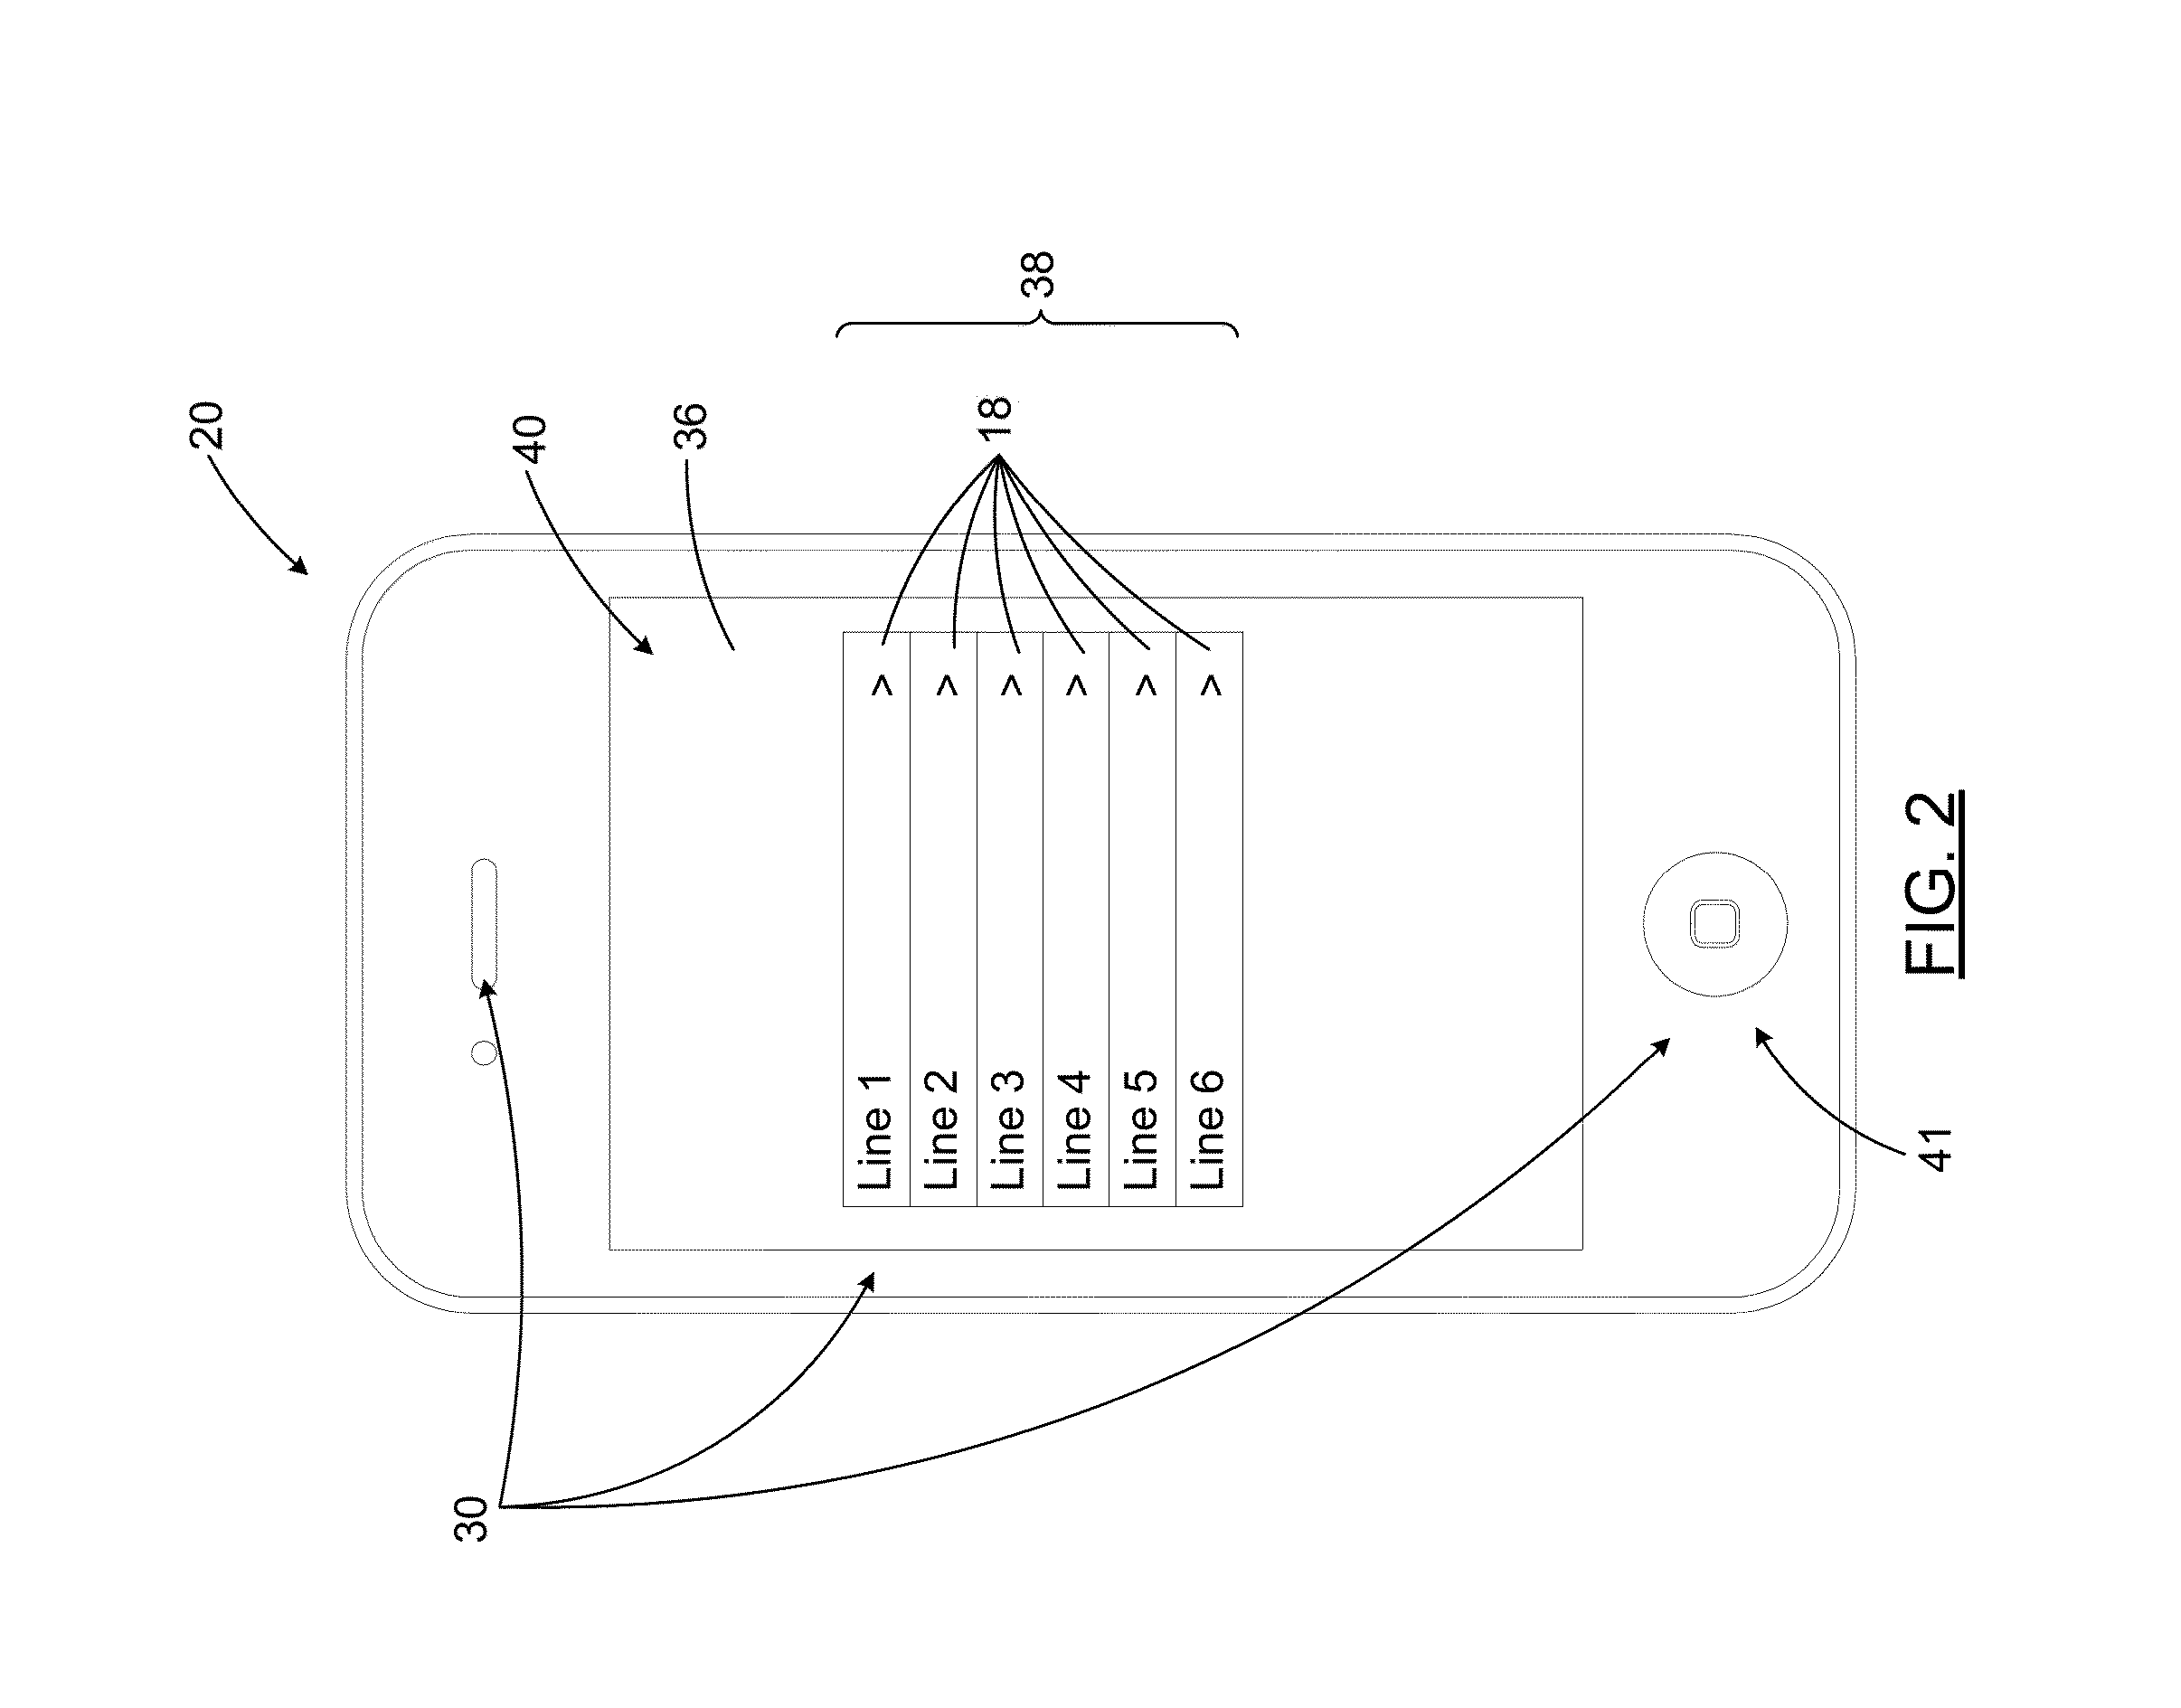 Multiple call session system and method for a mobile phone